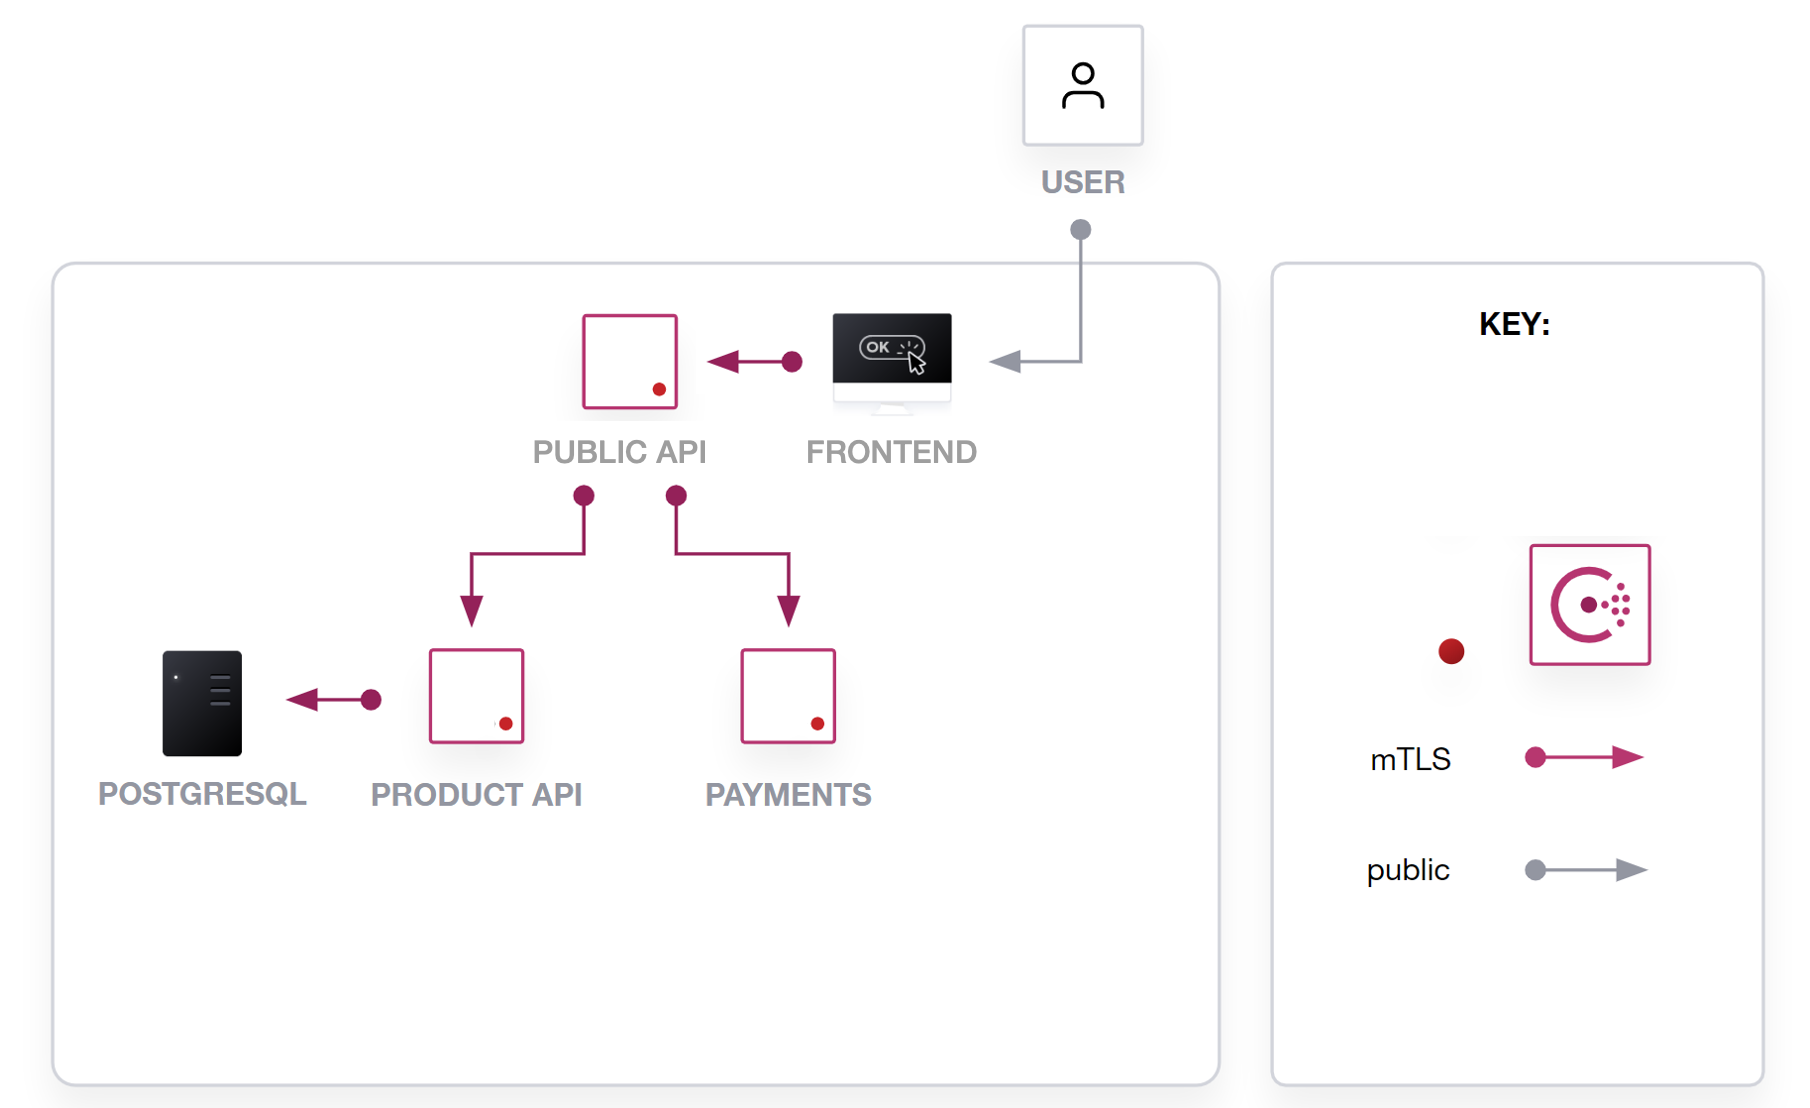 Picture of the HashiCups architecture, as described in the previous paragraph. A picture of a user with flowchart arrows indicating communication: A User connects from the Public. The Frontend communicates over mTLS with the Public API. The Public API communicates over mTLS with the Payments service and the Product API. The Product API communicates over mTLS with the postgres database.